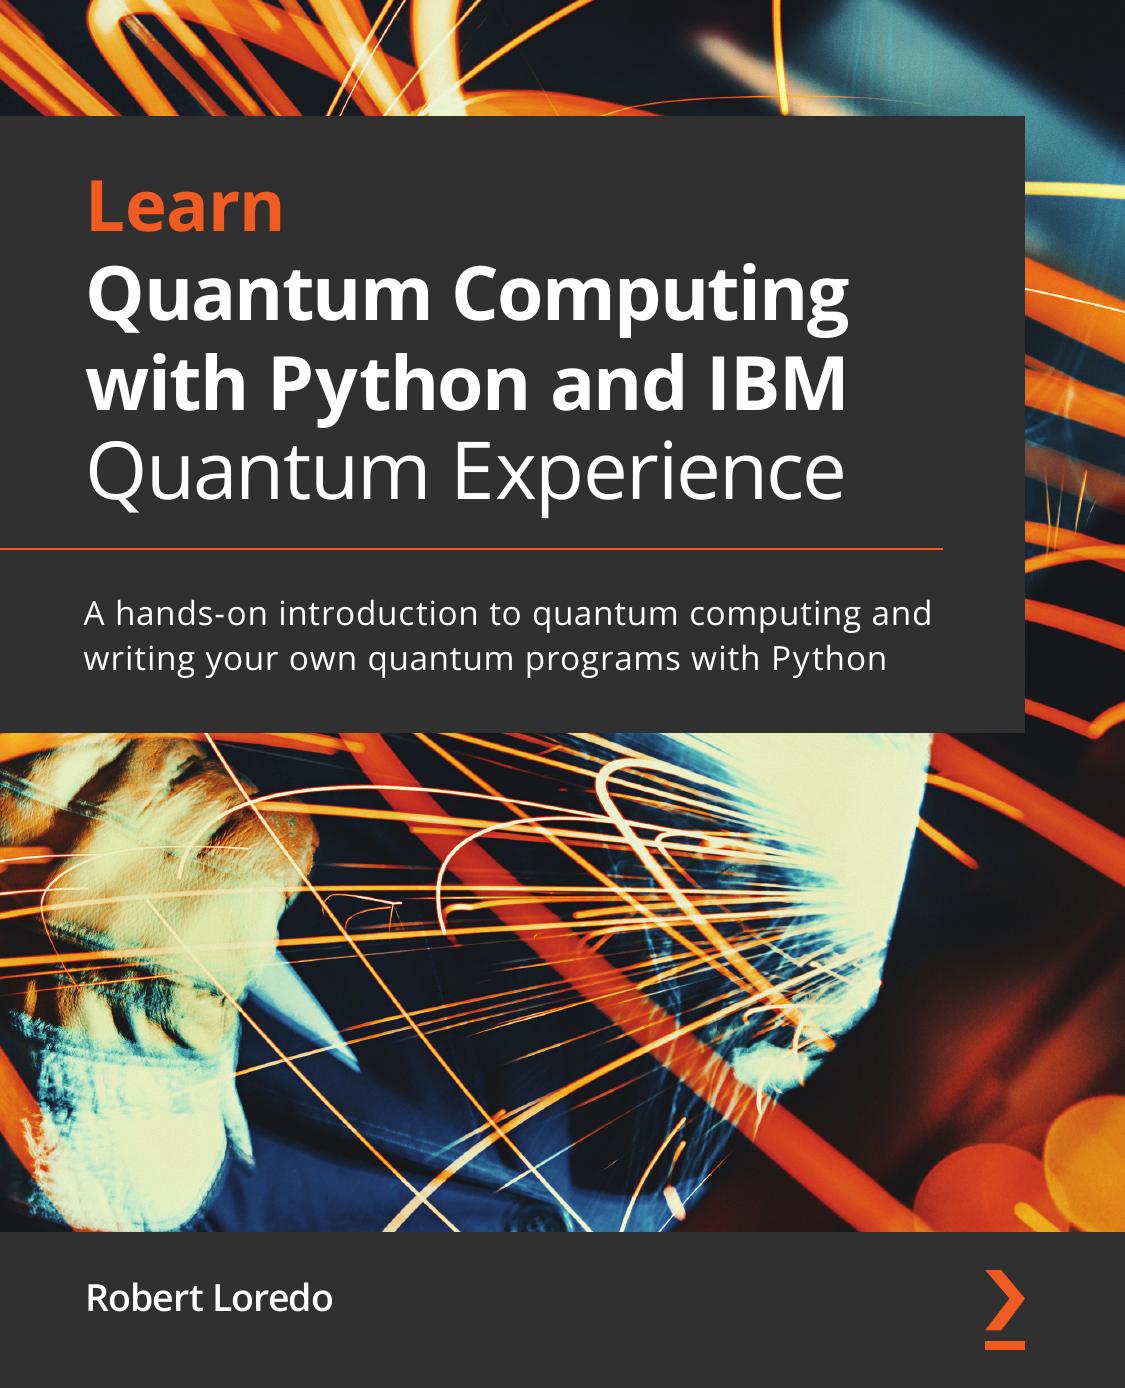 Learn Quantum Computing with Python and IBM Q Experience: A Hands-On Introduction to Quantum Computing and Writing Your Own Quantum Programs with Python